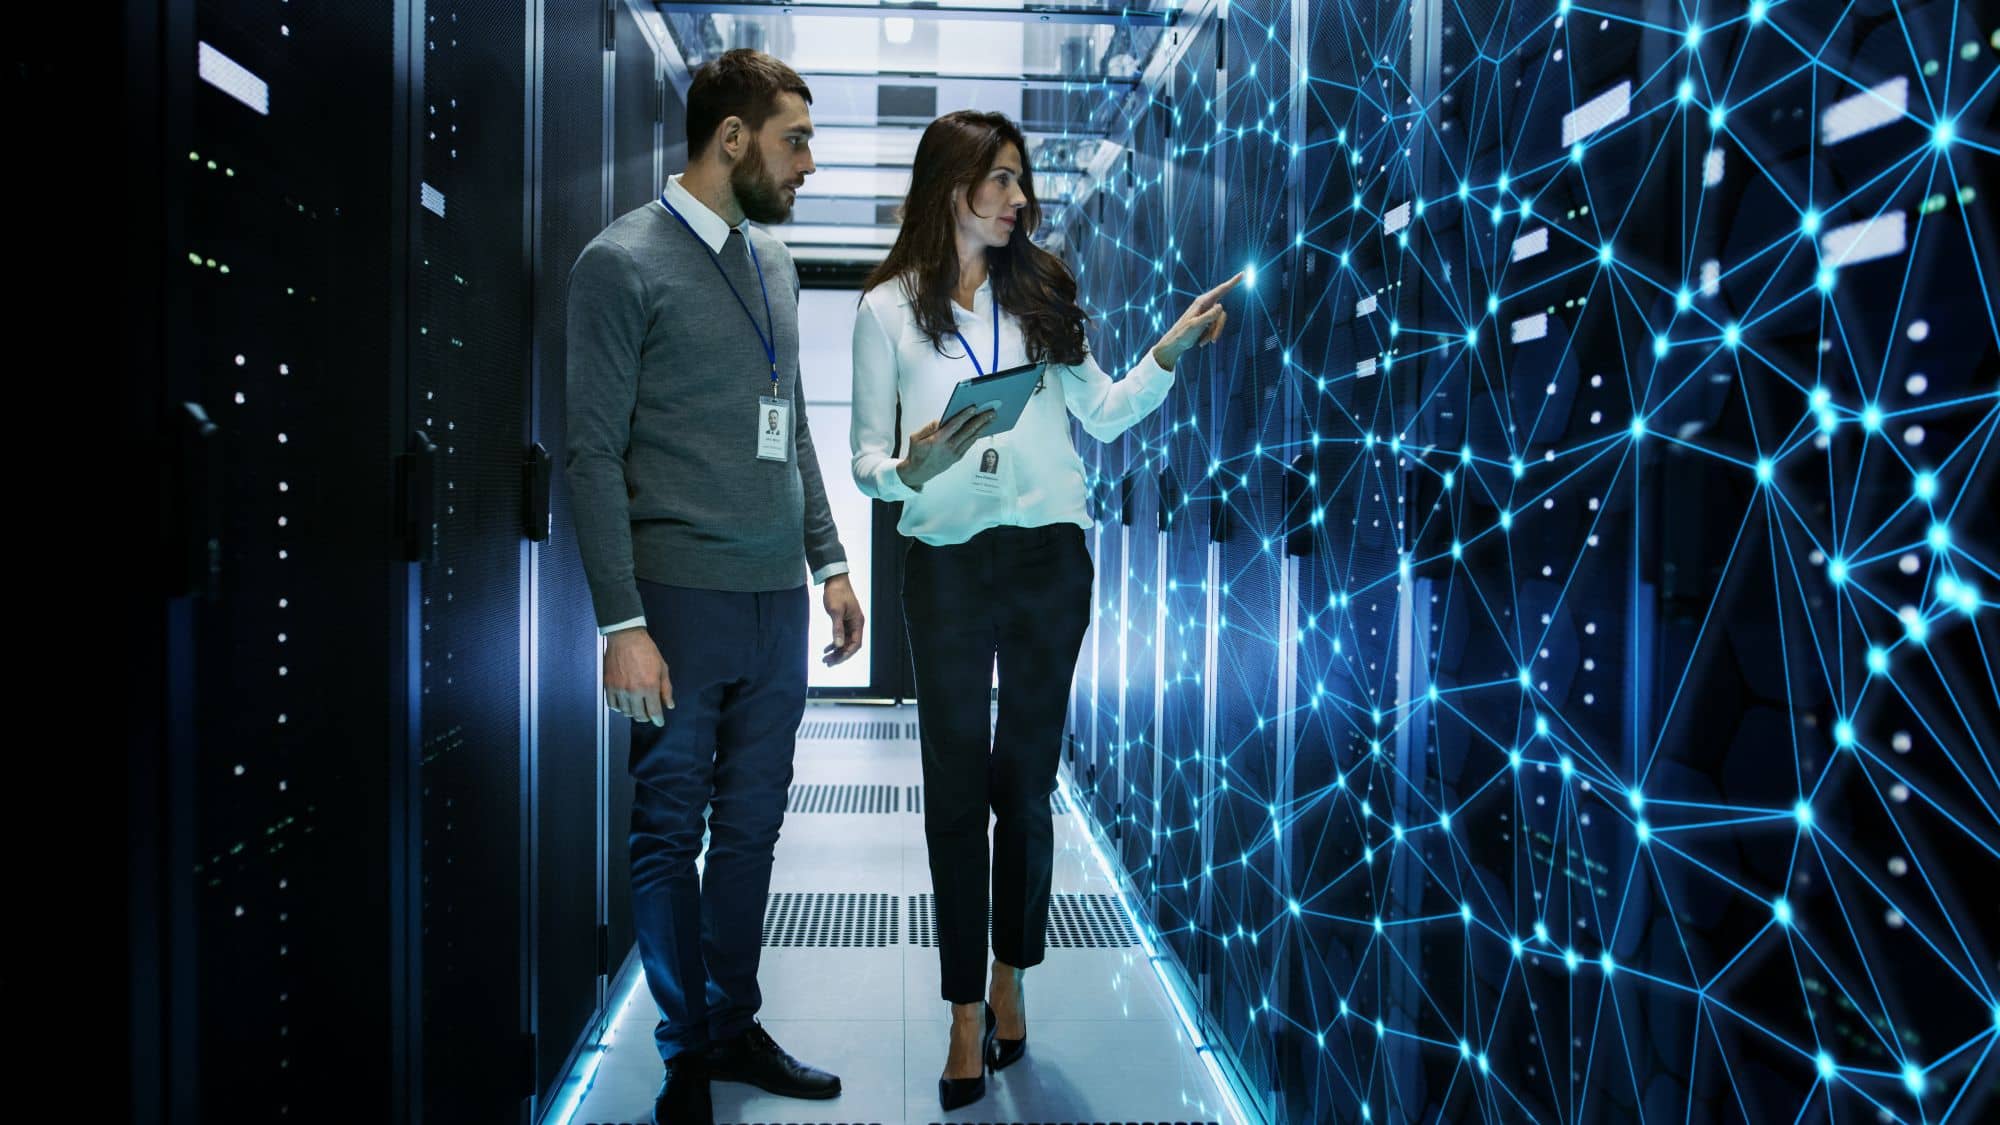 A man and a woman in a datacenter, pointing at lines on the wall representing a firewall